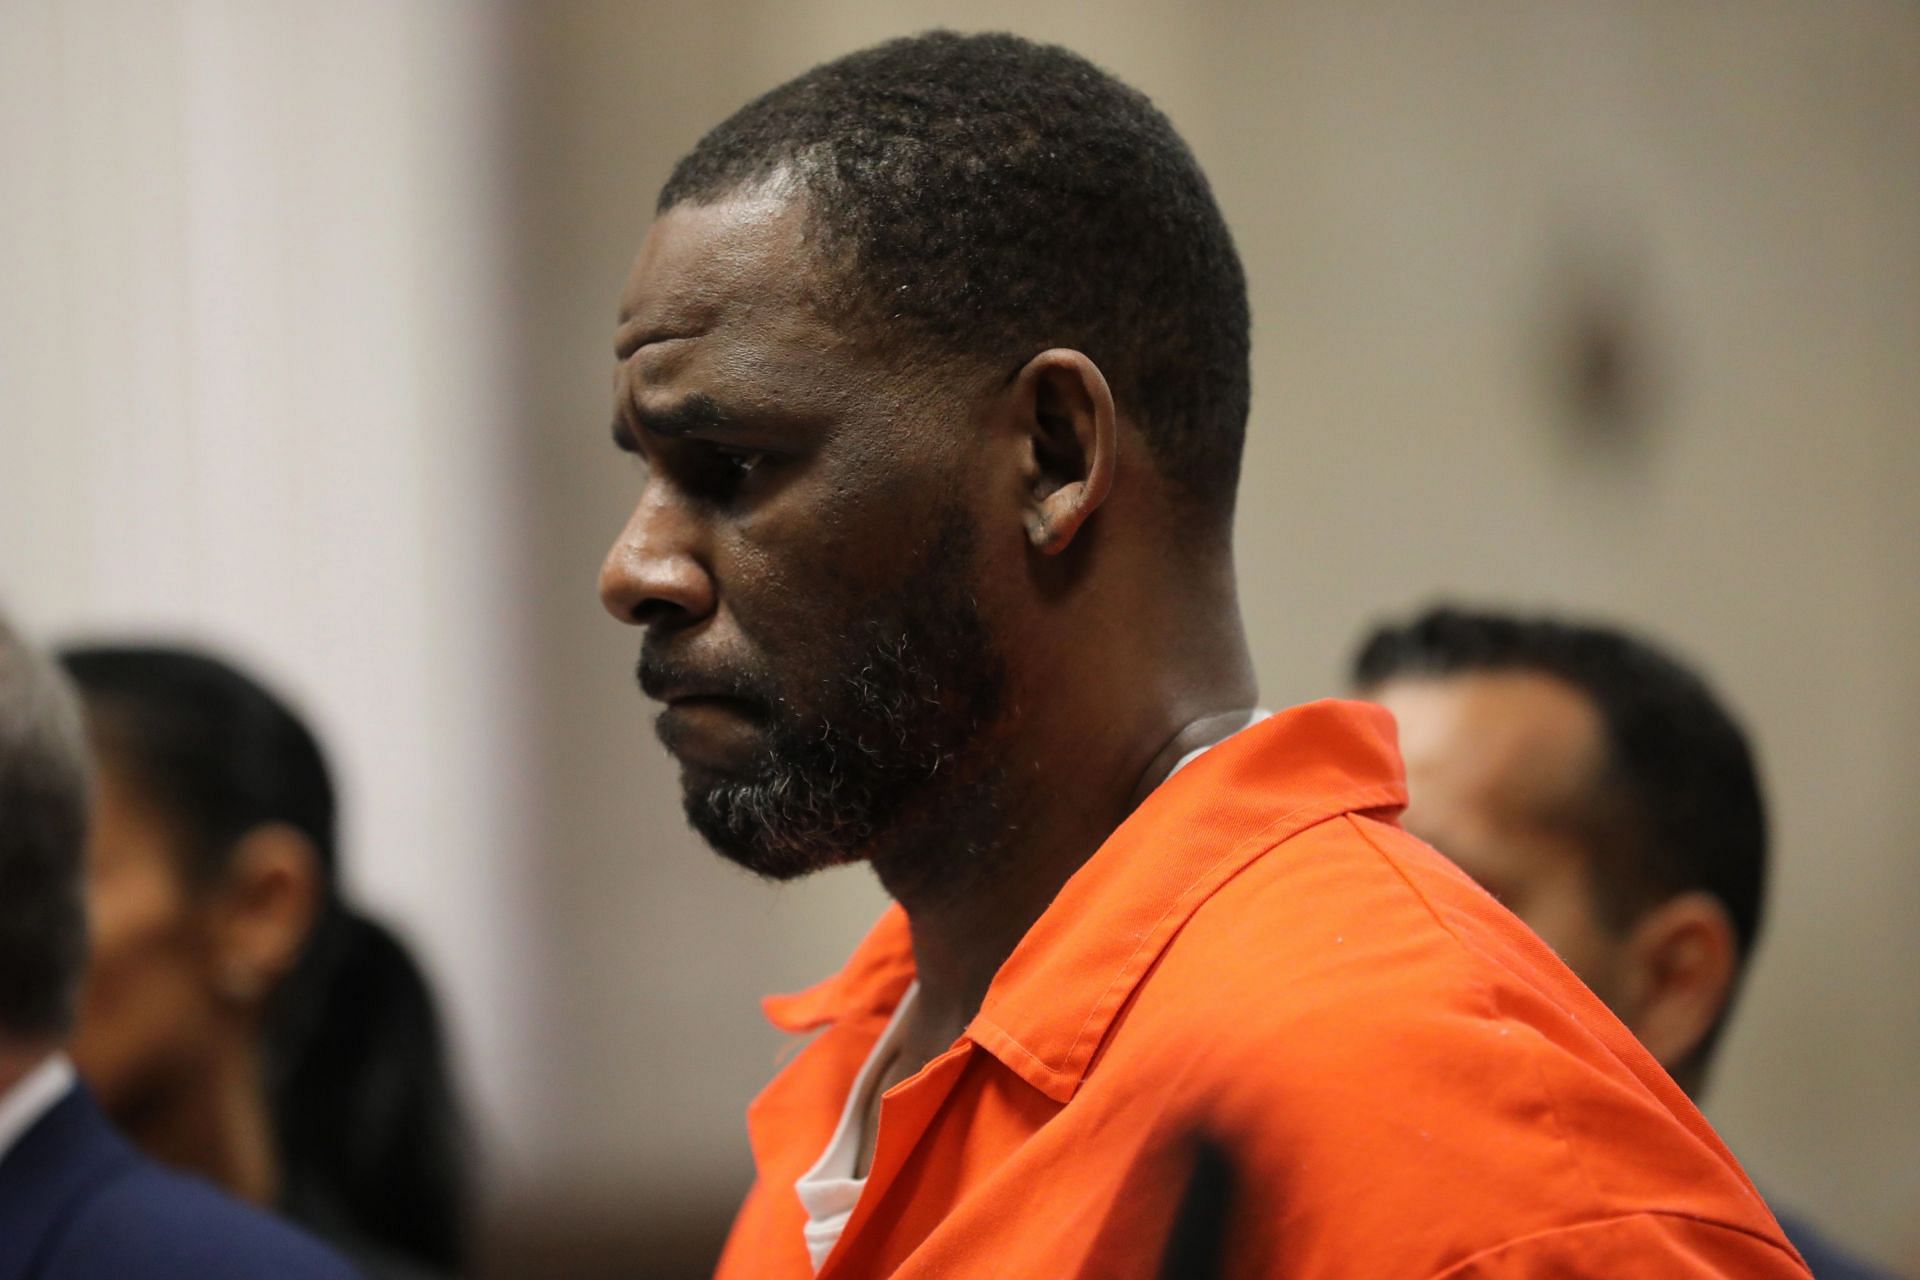 Robert Sylvester Kelly was sentenced to 30 years in prison (Image via POOL/Antonio Perez/Getty Images)